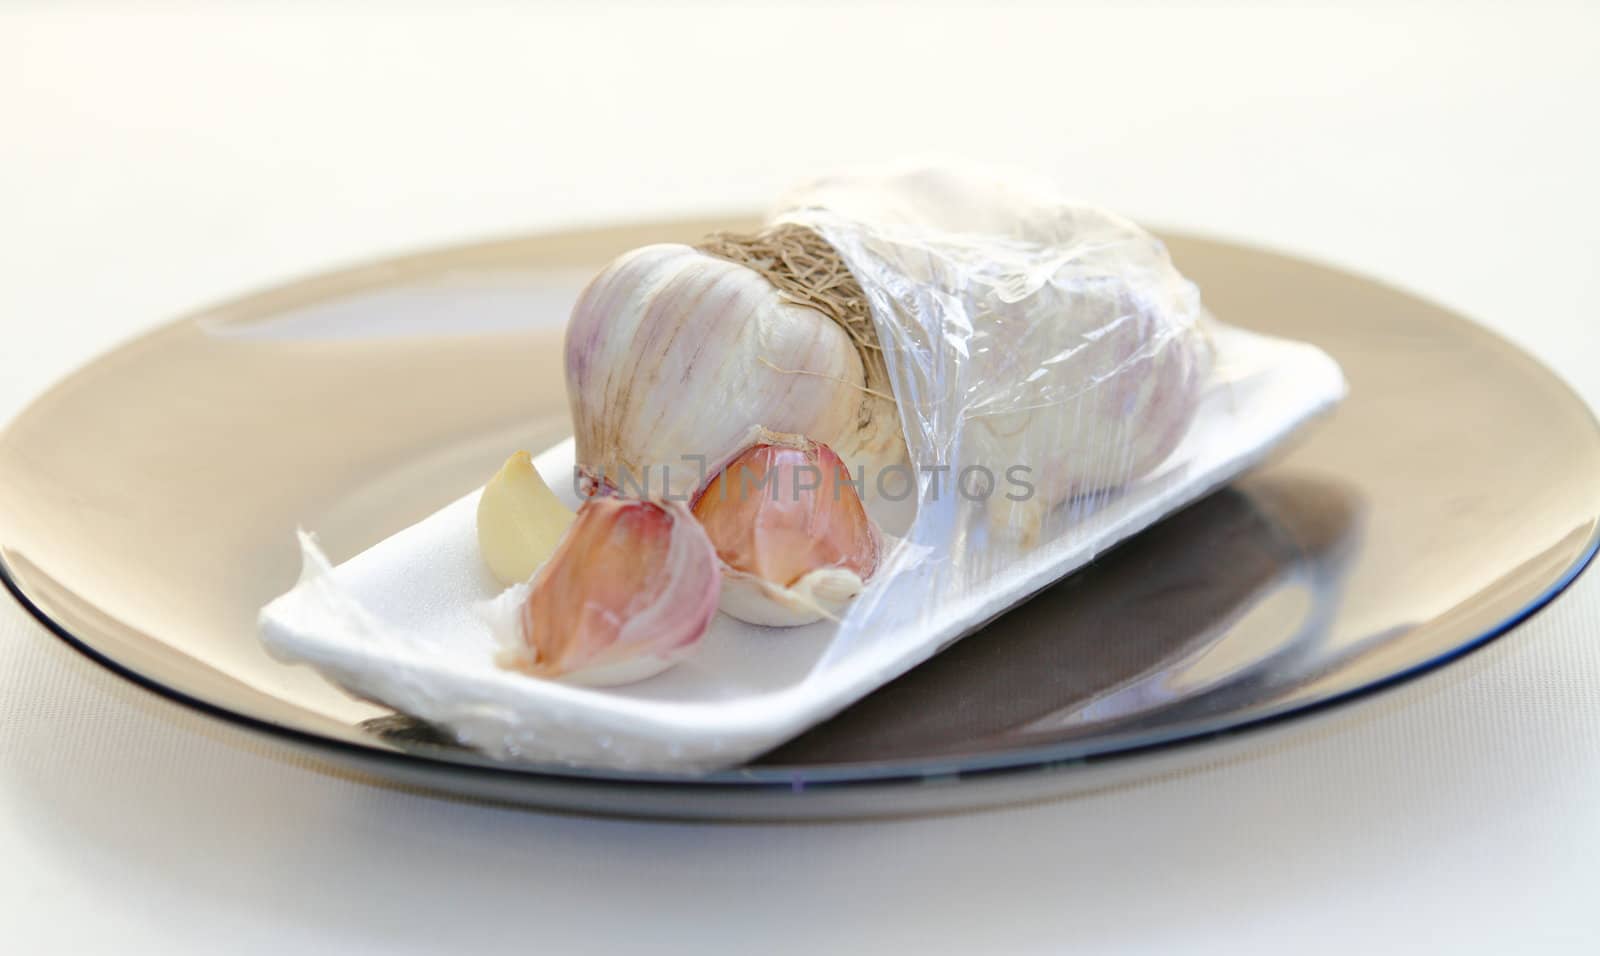 garlic in a package on a light background